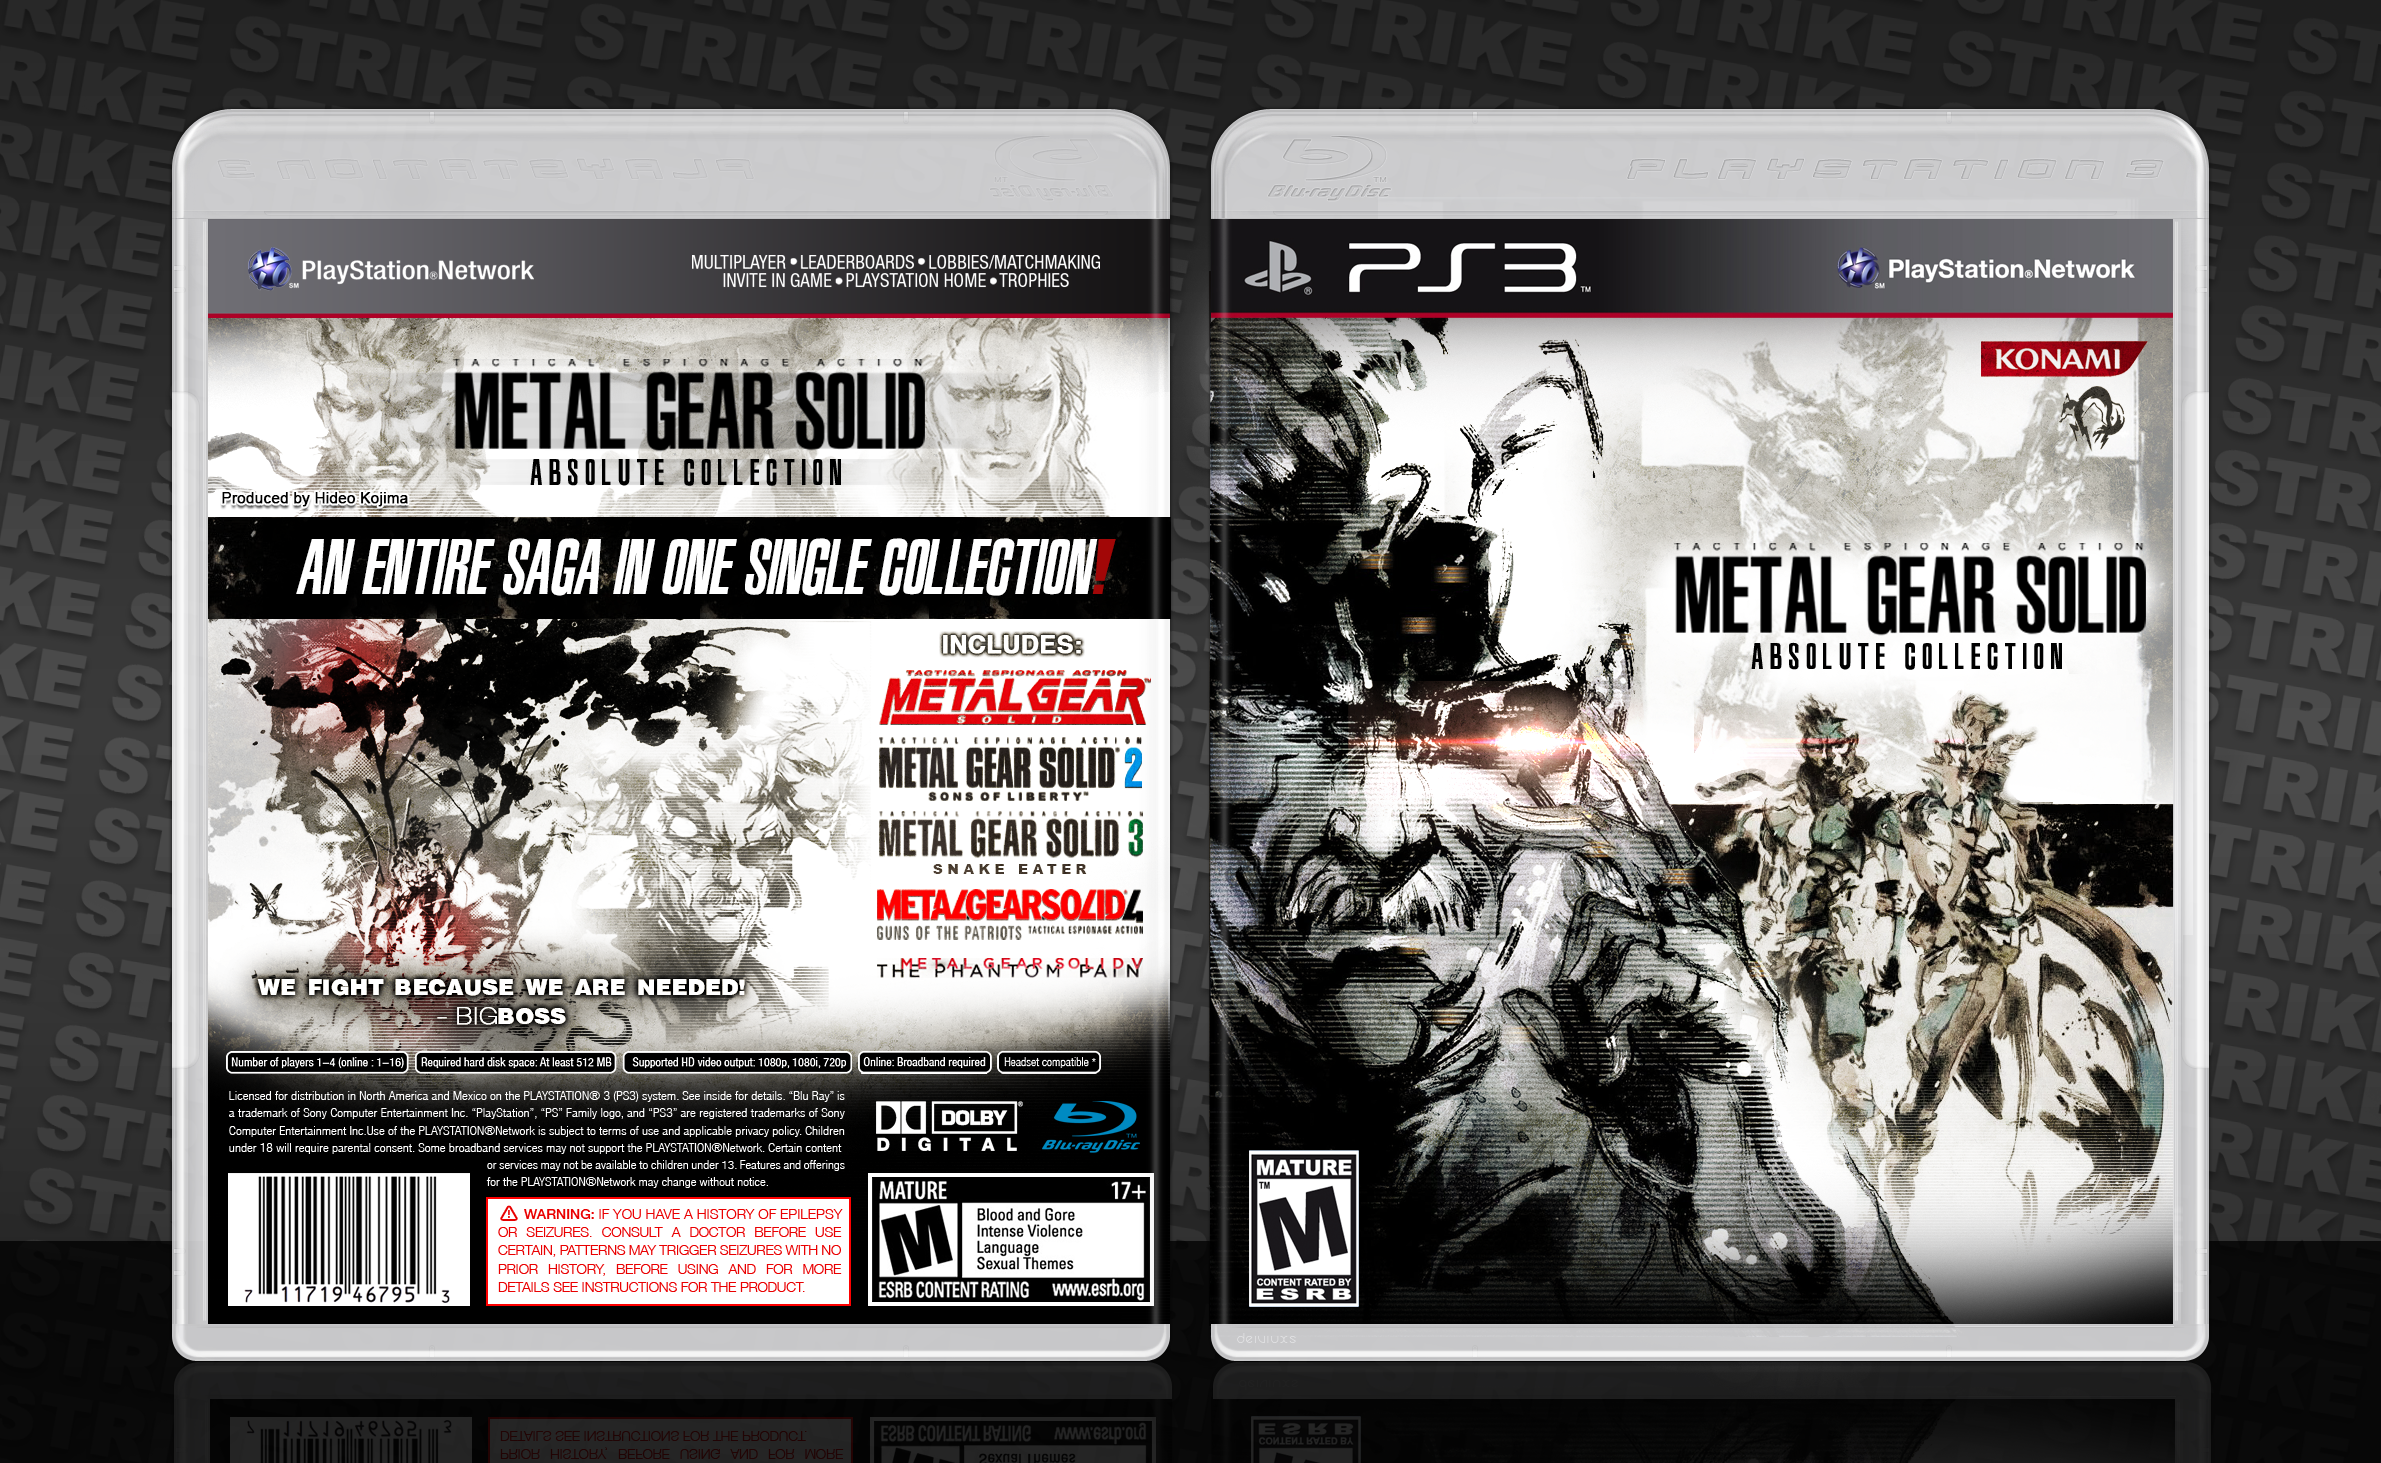 Metal Gear Solid: Absolute Collection box cover